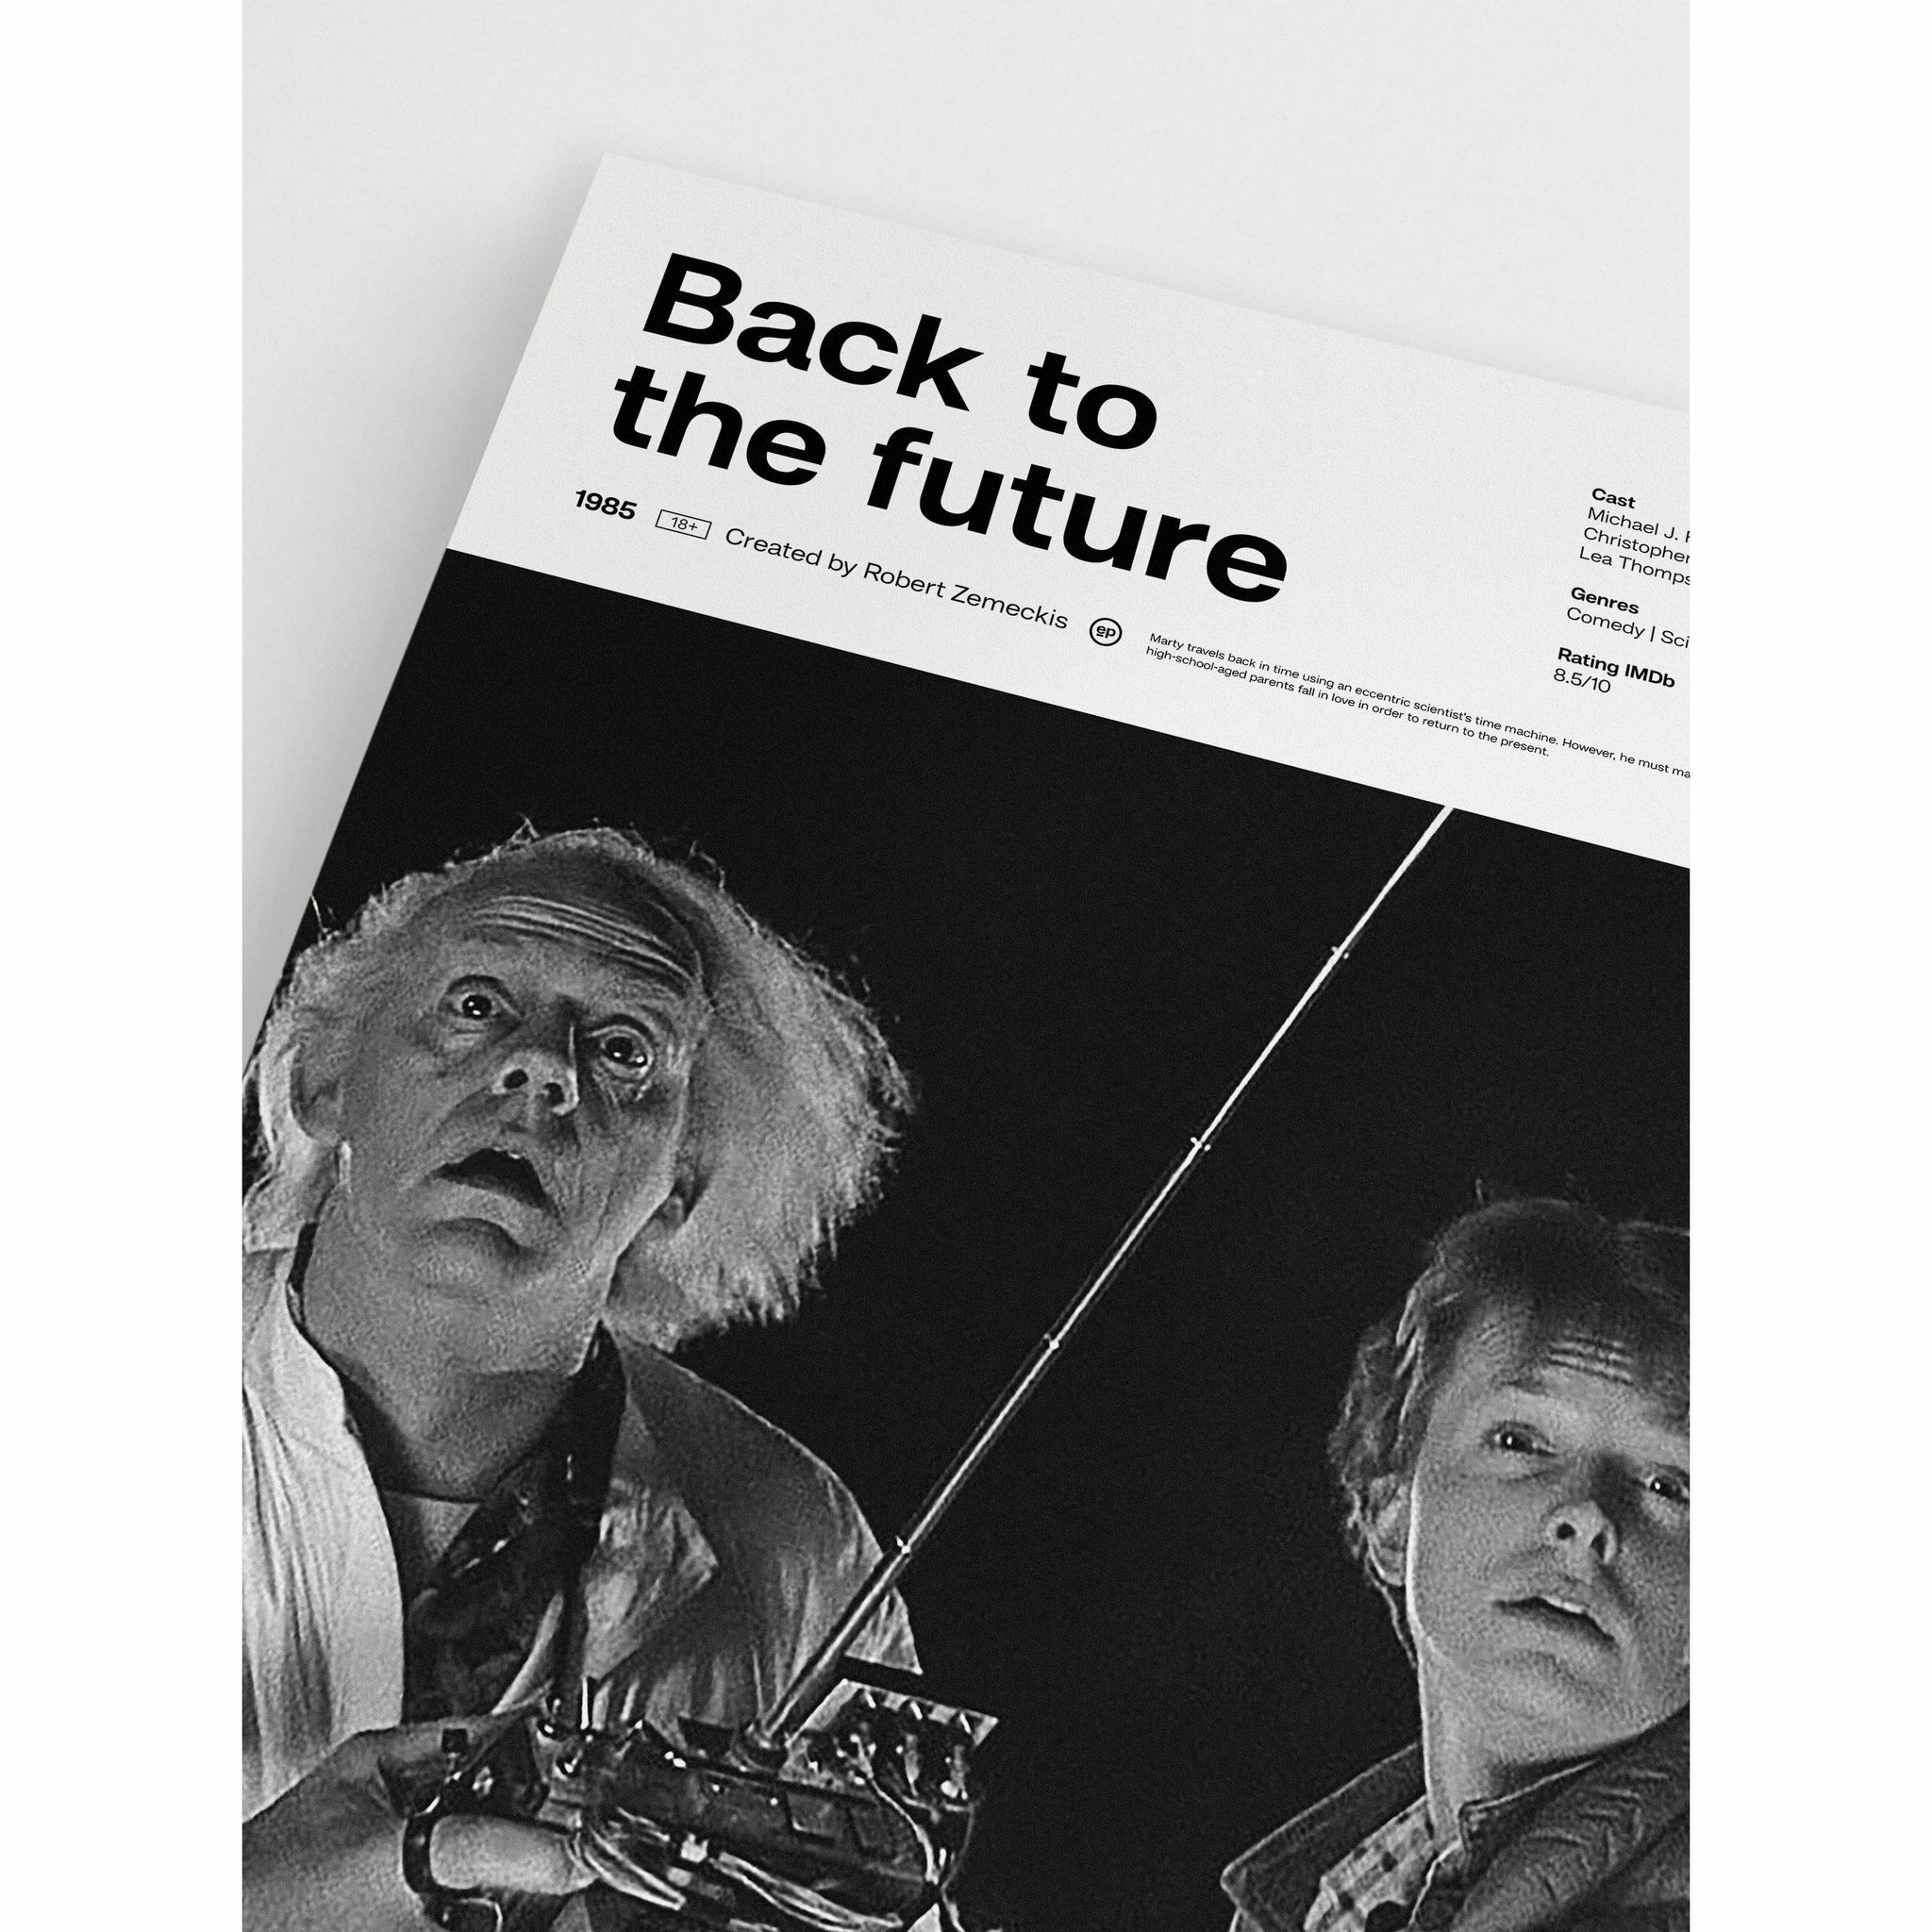 Back to the future Poster